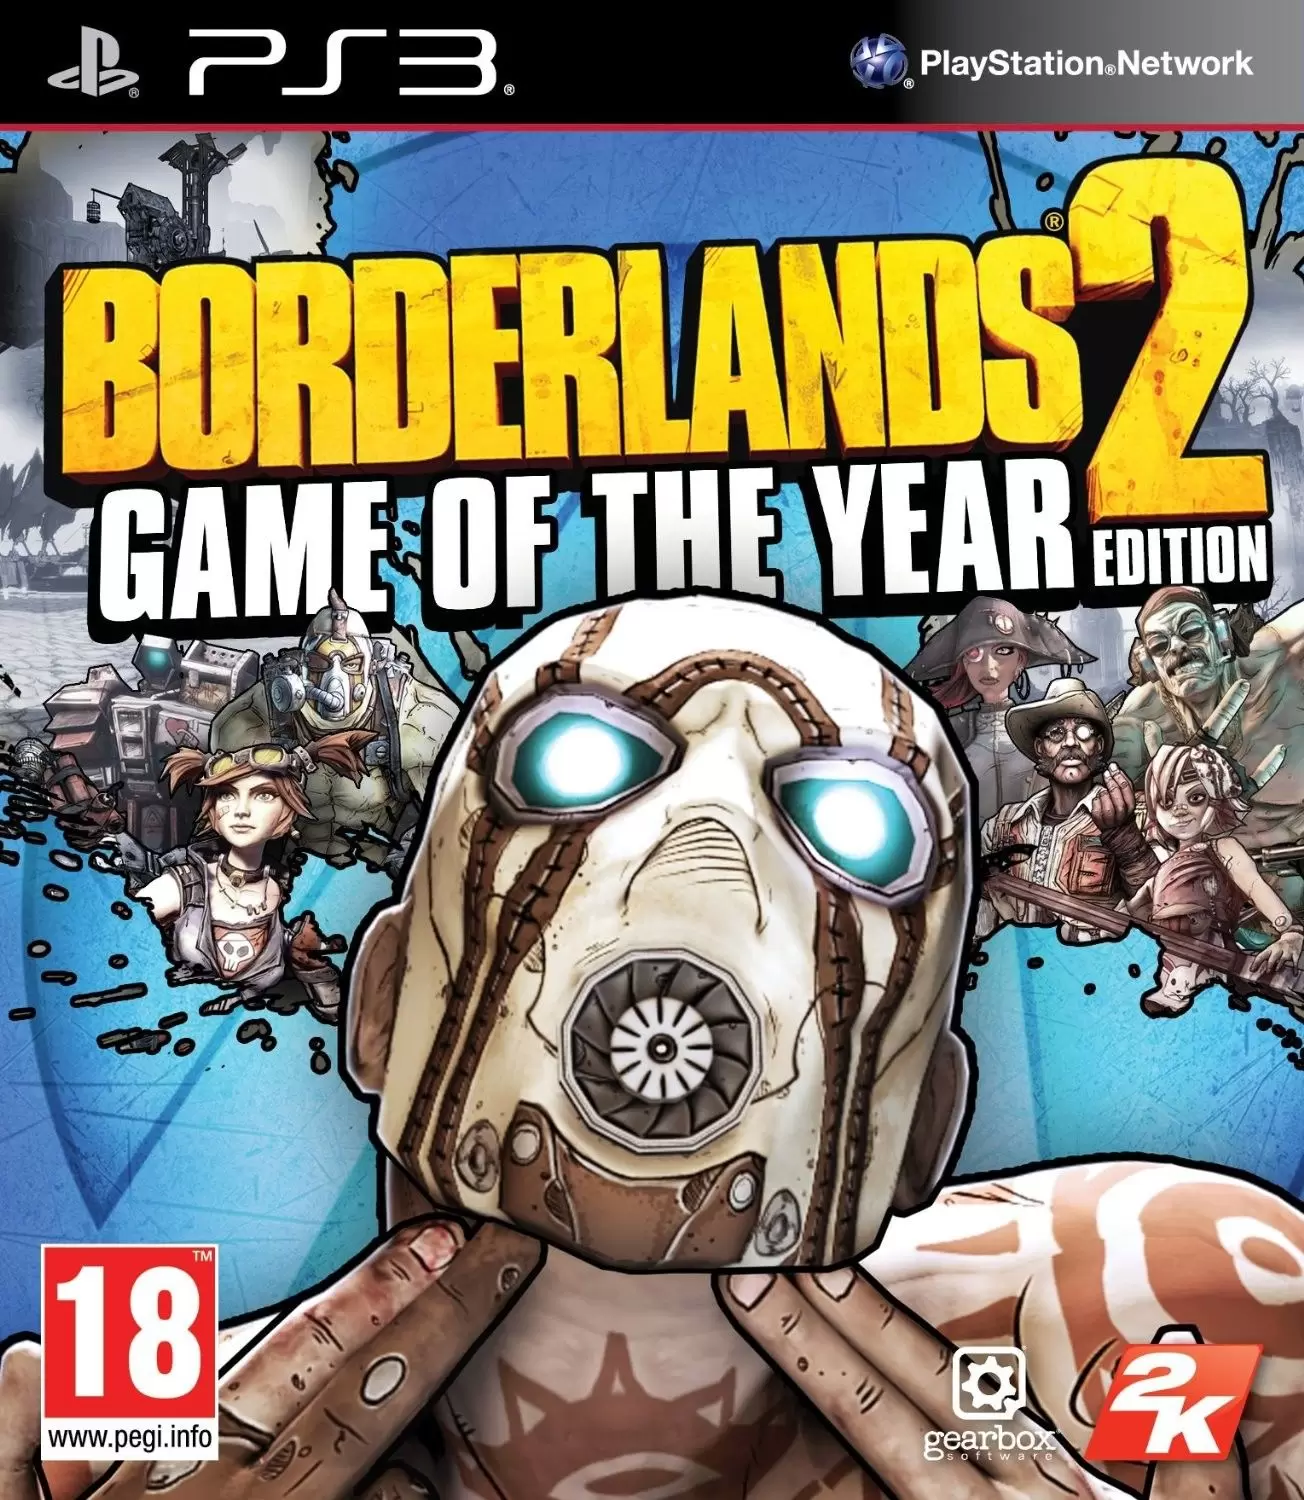 Jeux PS3 - Borderlands 2 Game of the Year Edition